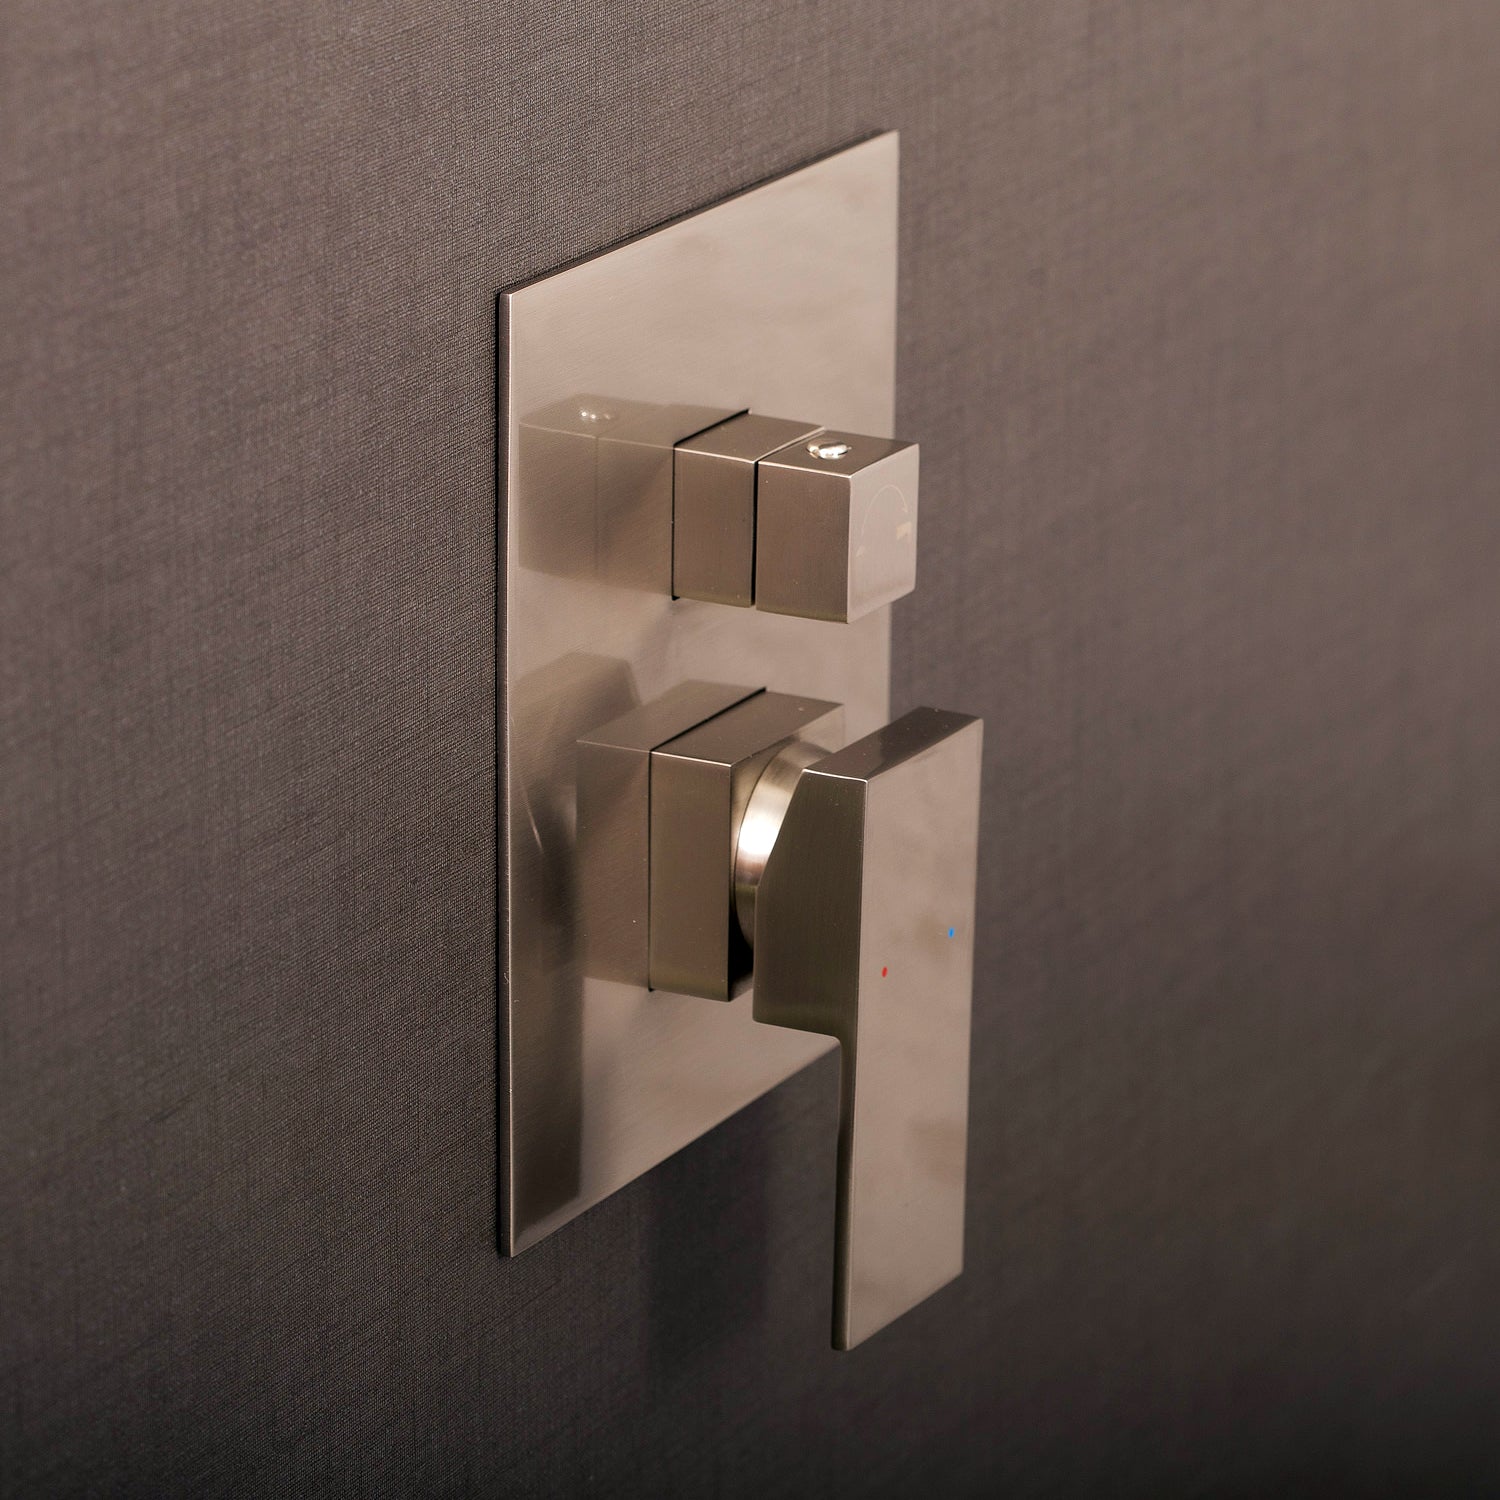 DAX Square Shower Single Valve Trim, Brass Body, Brushed Nickel Finish, 6-5/16 x 7-1/2 x 3-7/8 Inches (DAX-6973A-BN)